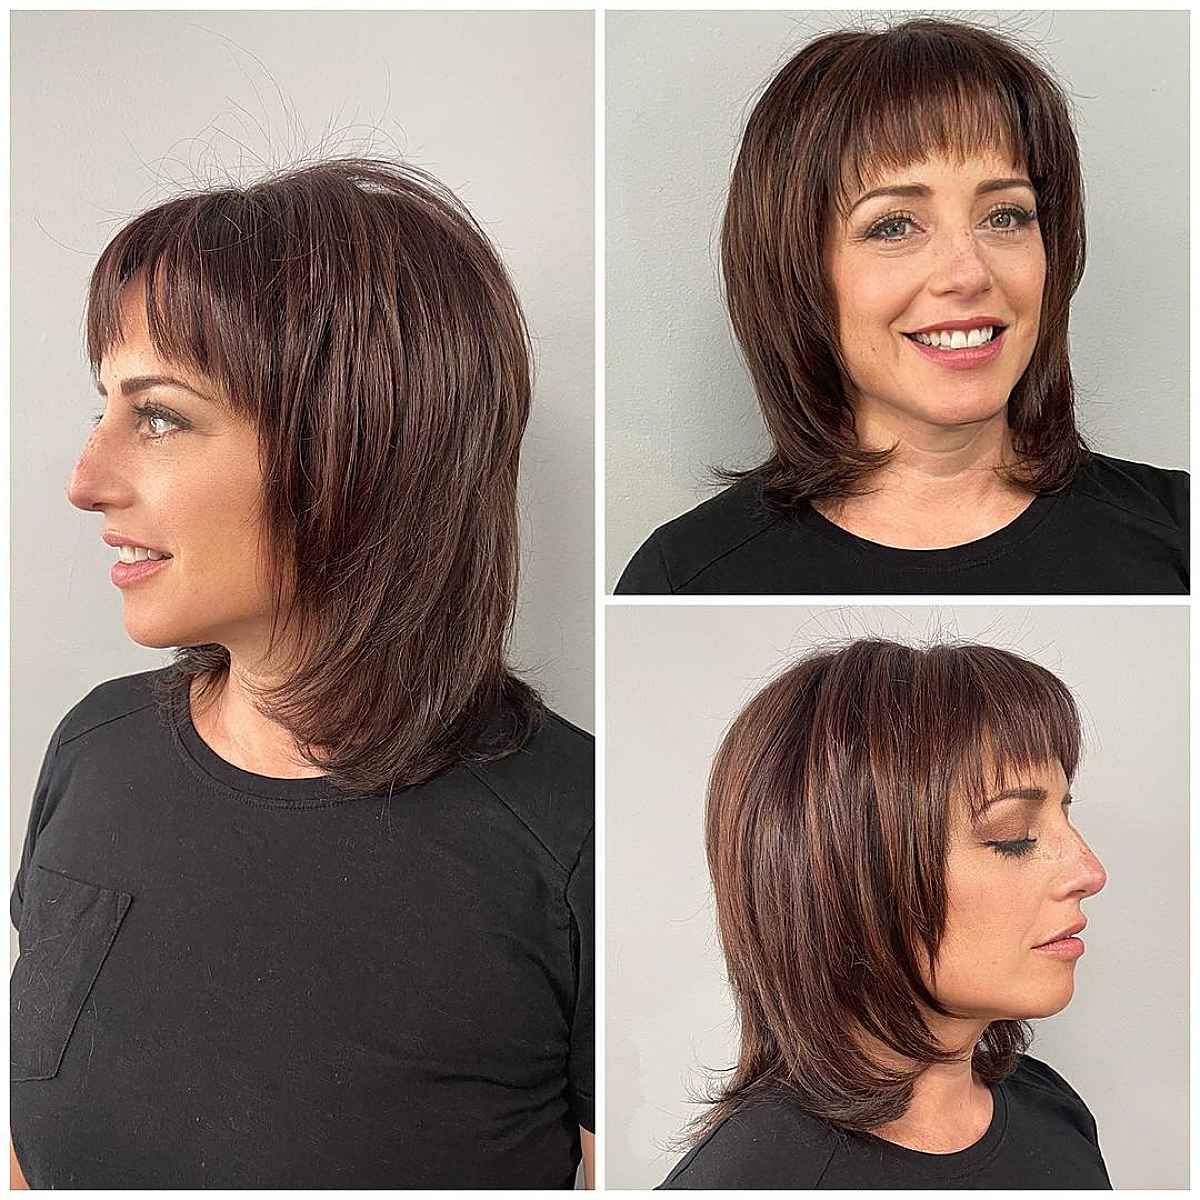 51 Low Maintenance Shaggy Haircuts With Bangs For Busy & Trendy Women Within Most Popular Low Maintenance Shag For Thin Hair (View 3 of 18)